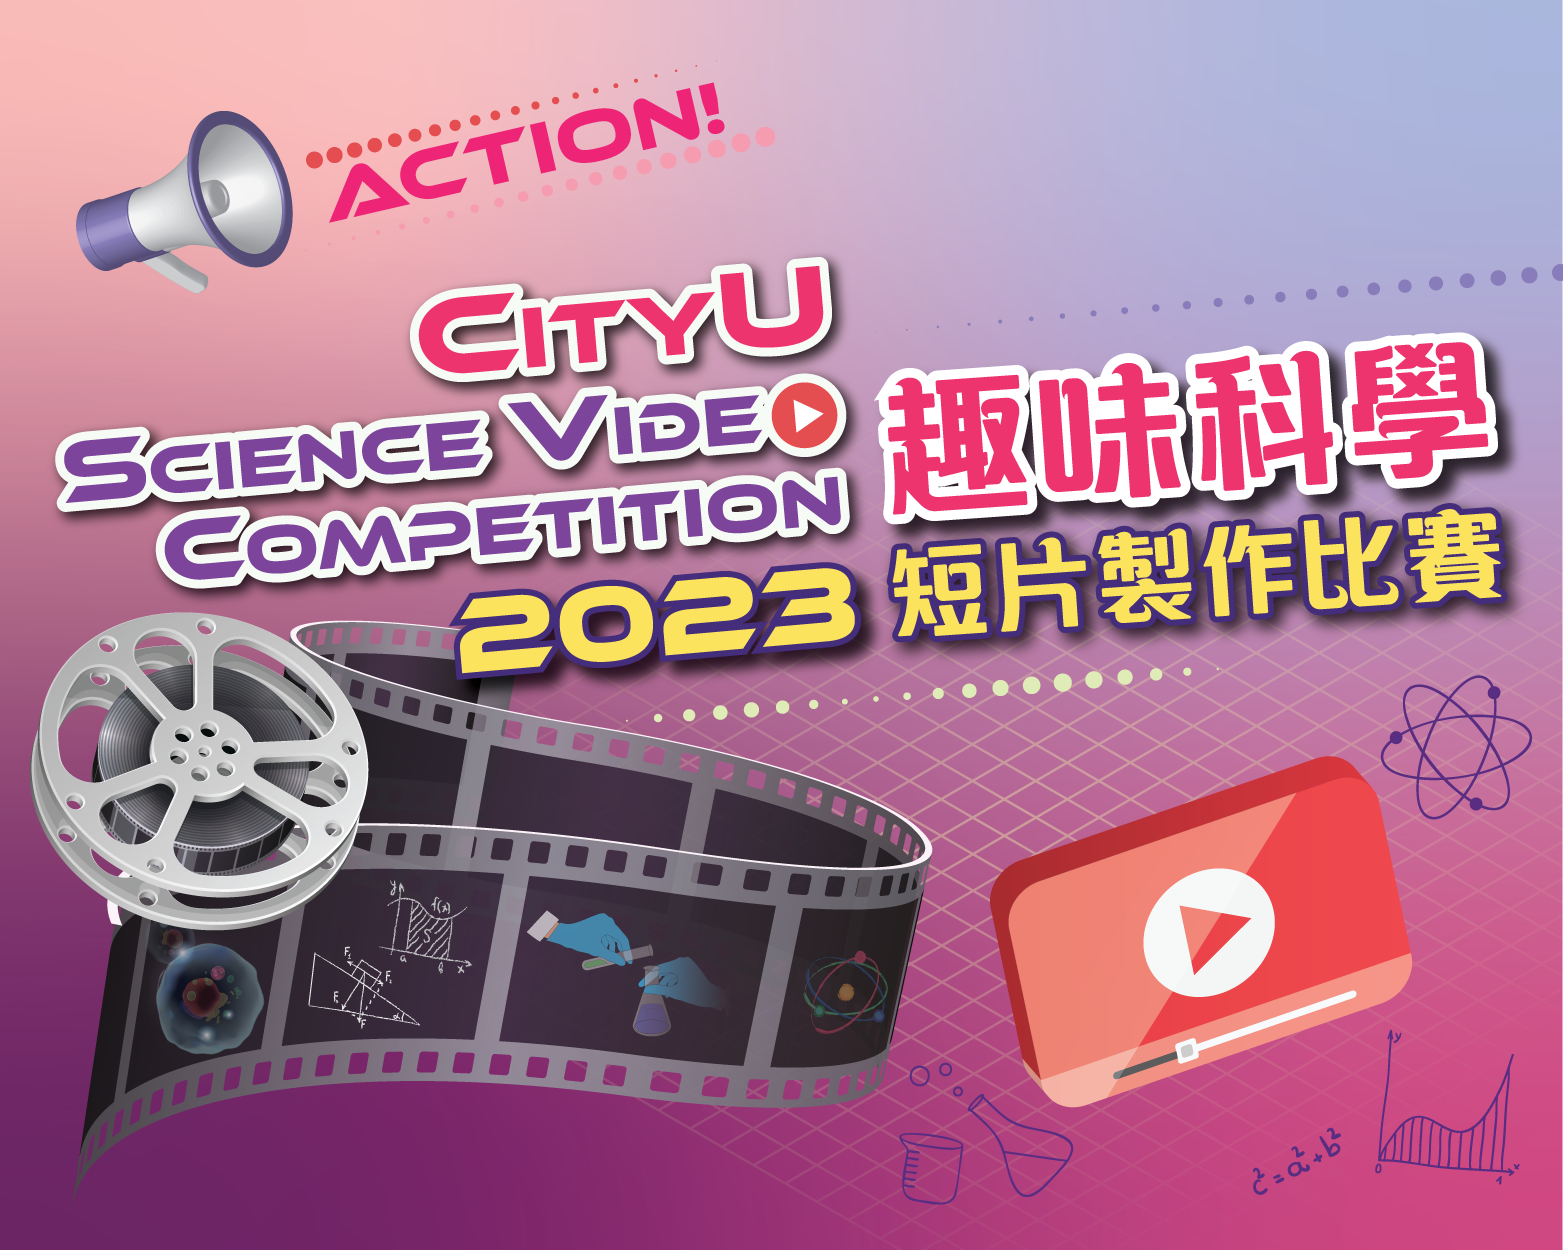 CityU Science Video Competition 2023